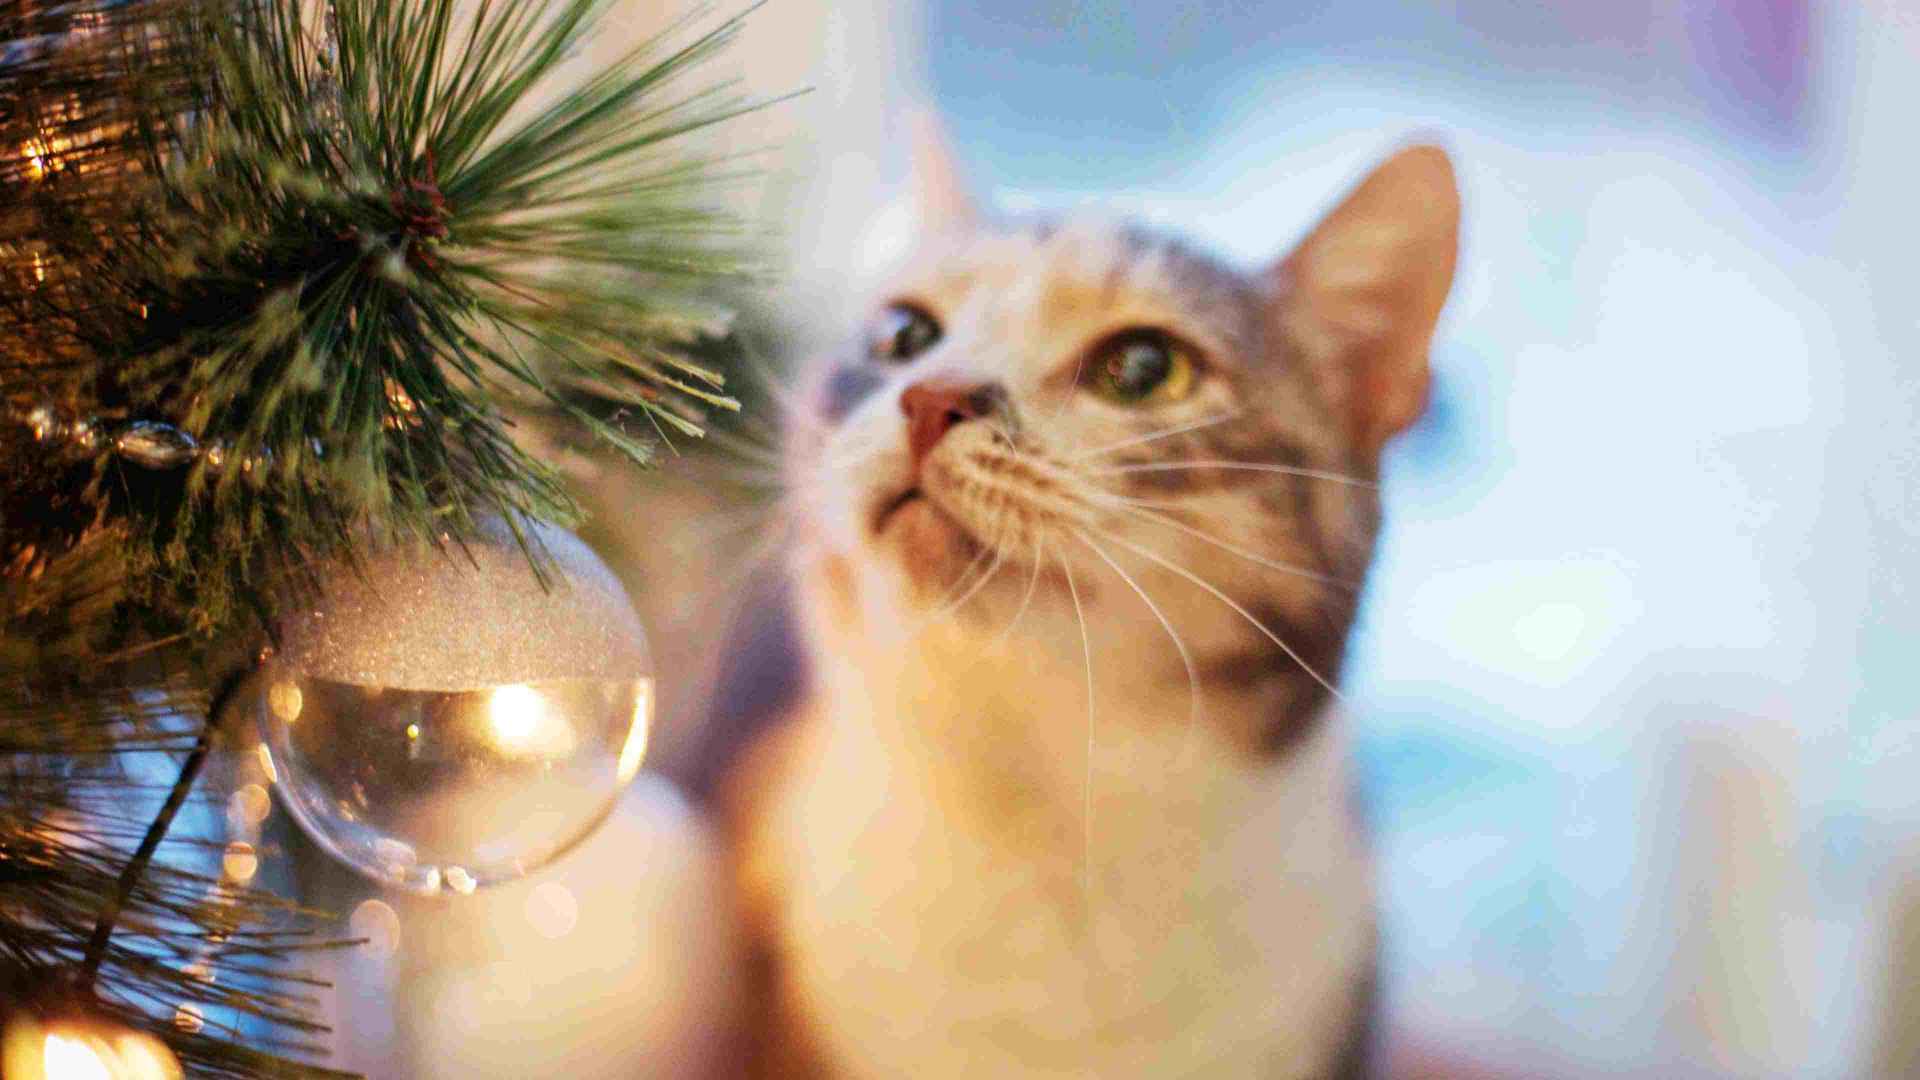 are christmas trees poisonous to cats and dogs